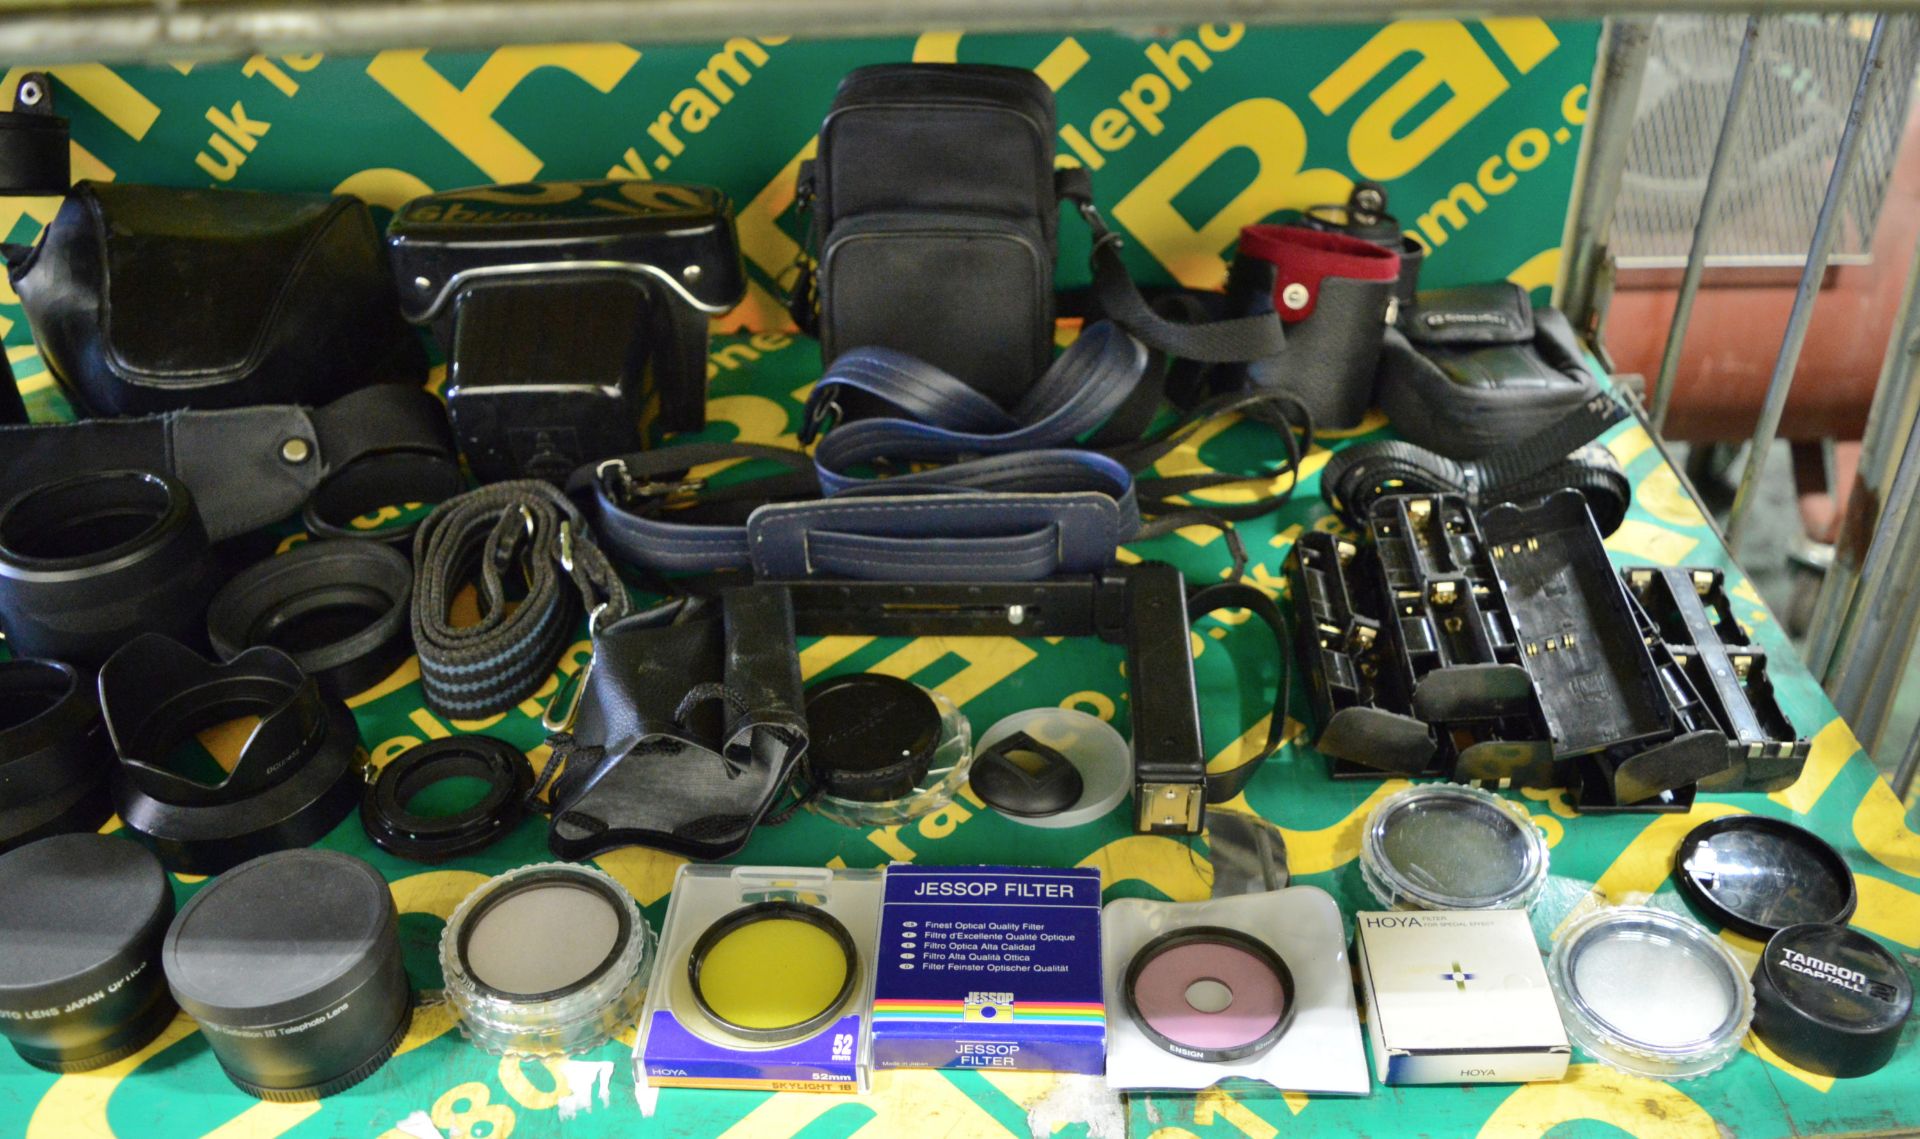 Camera Accessories inc Lenses, Cases, Battery Trays, Filters, Straps. - Image 3 of 3